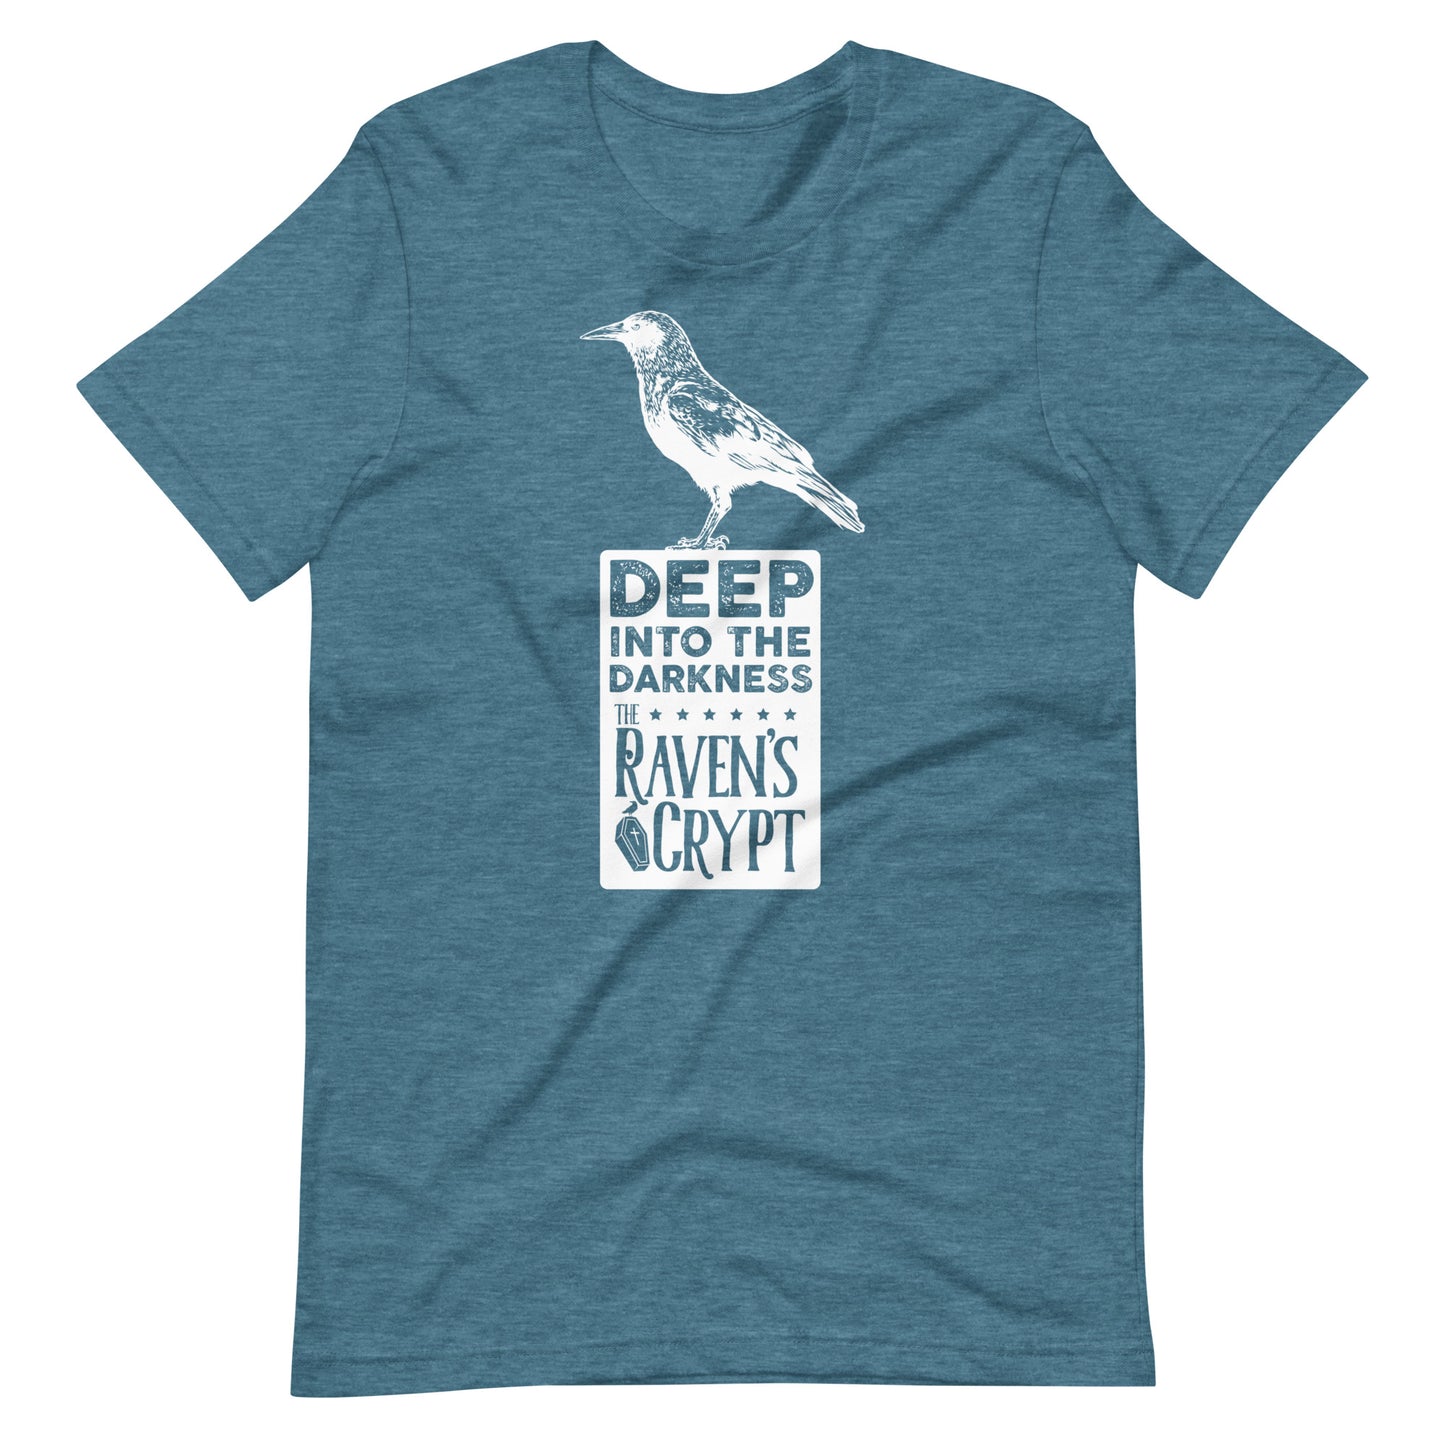 Deep Into the Darkness Crypt 2 - Men's t-shirt - Heather Deep Teal Front